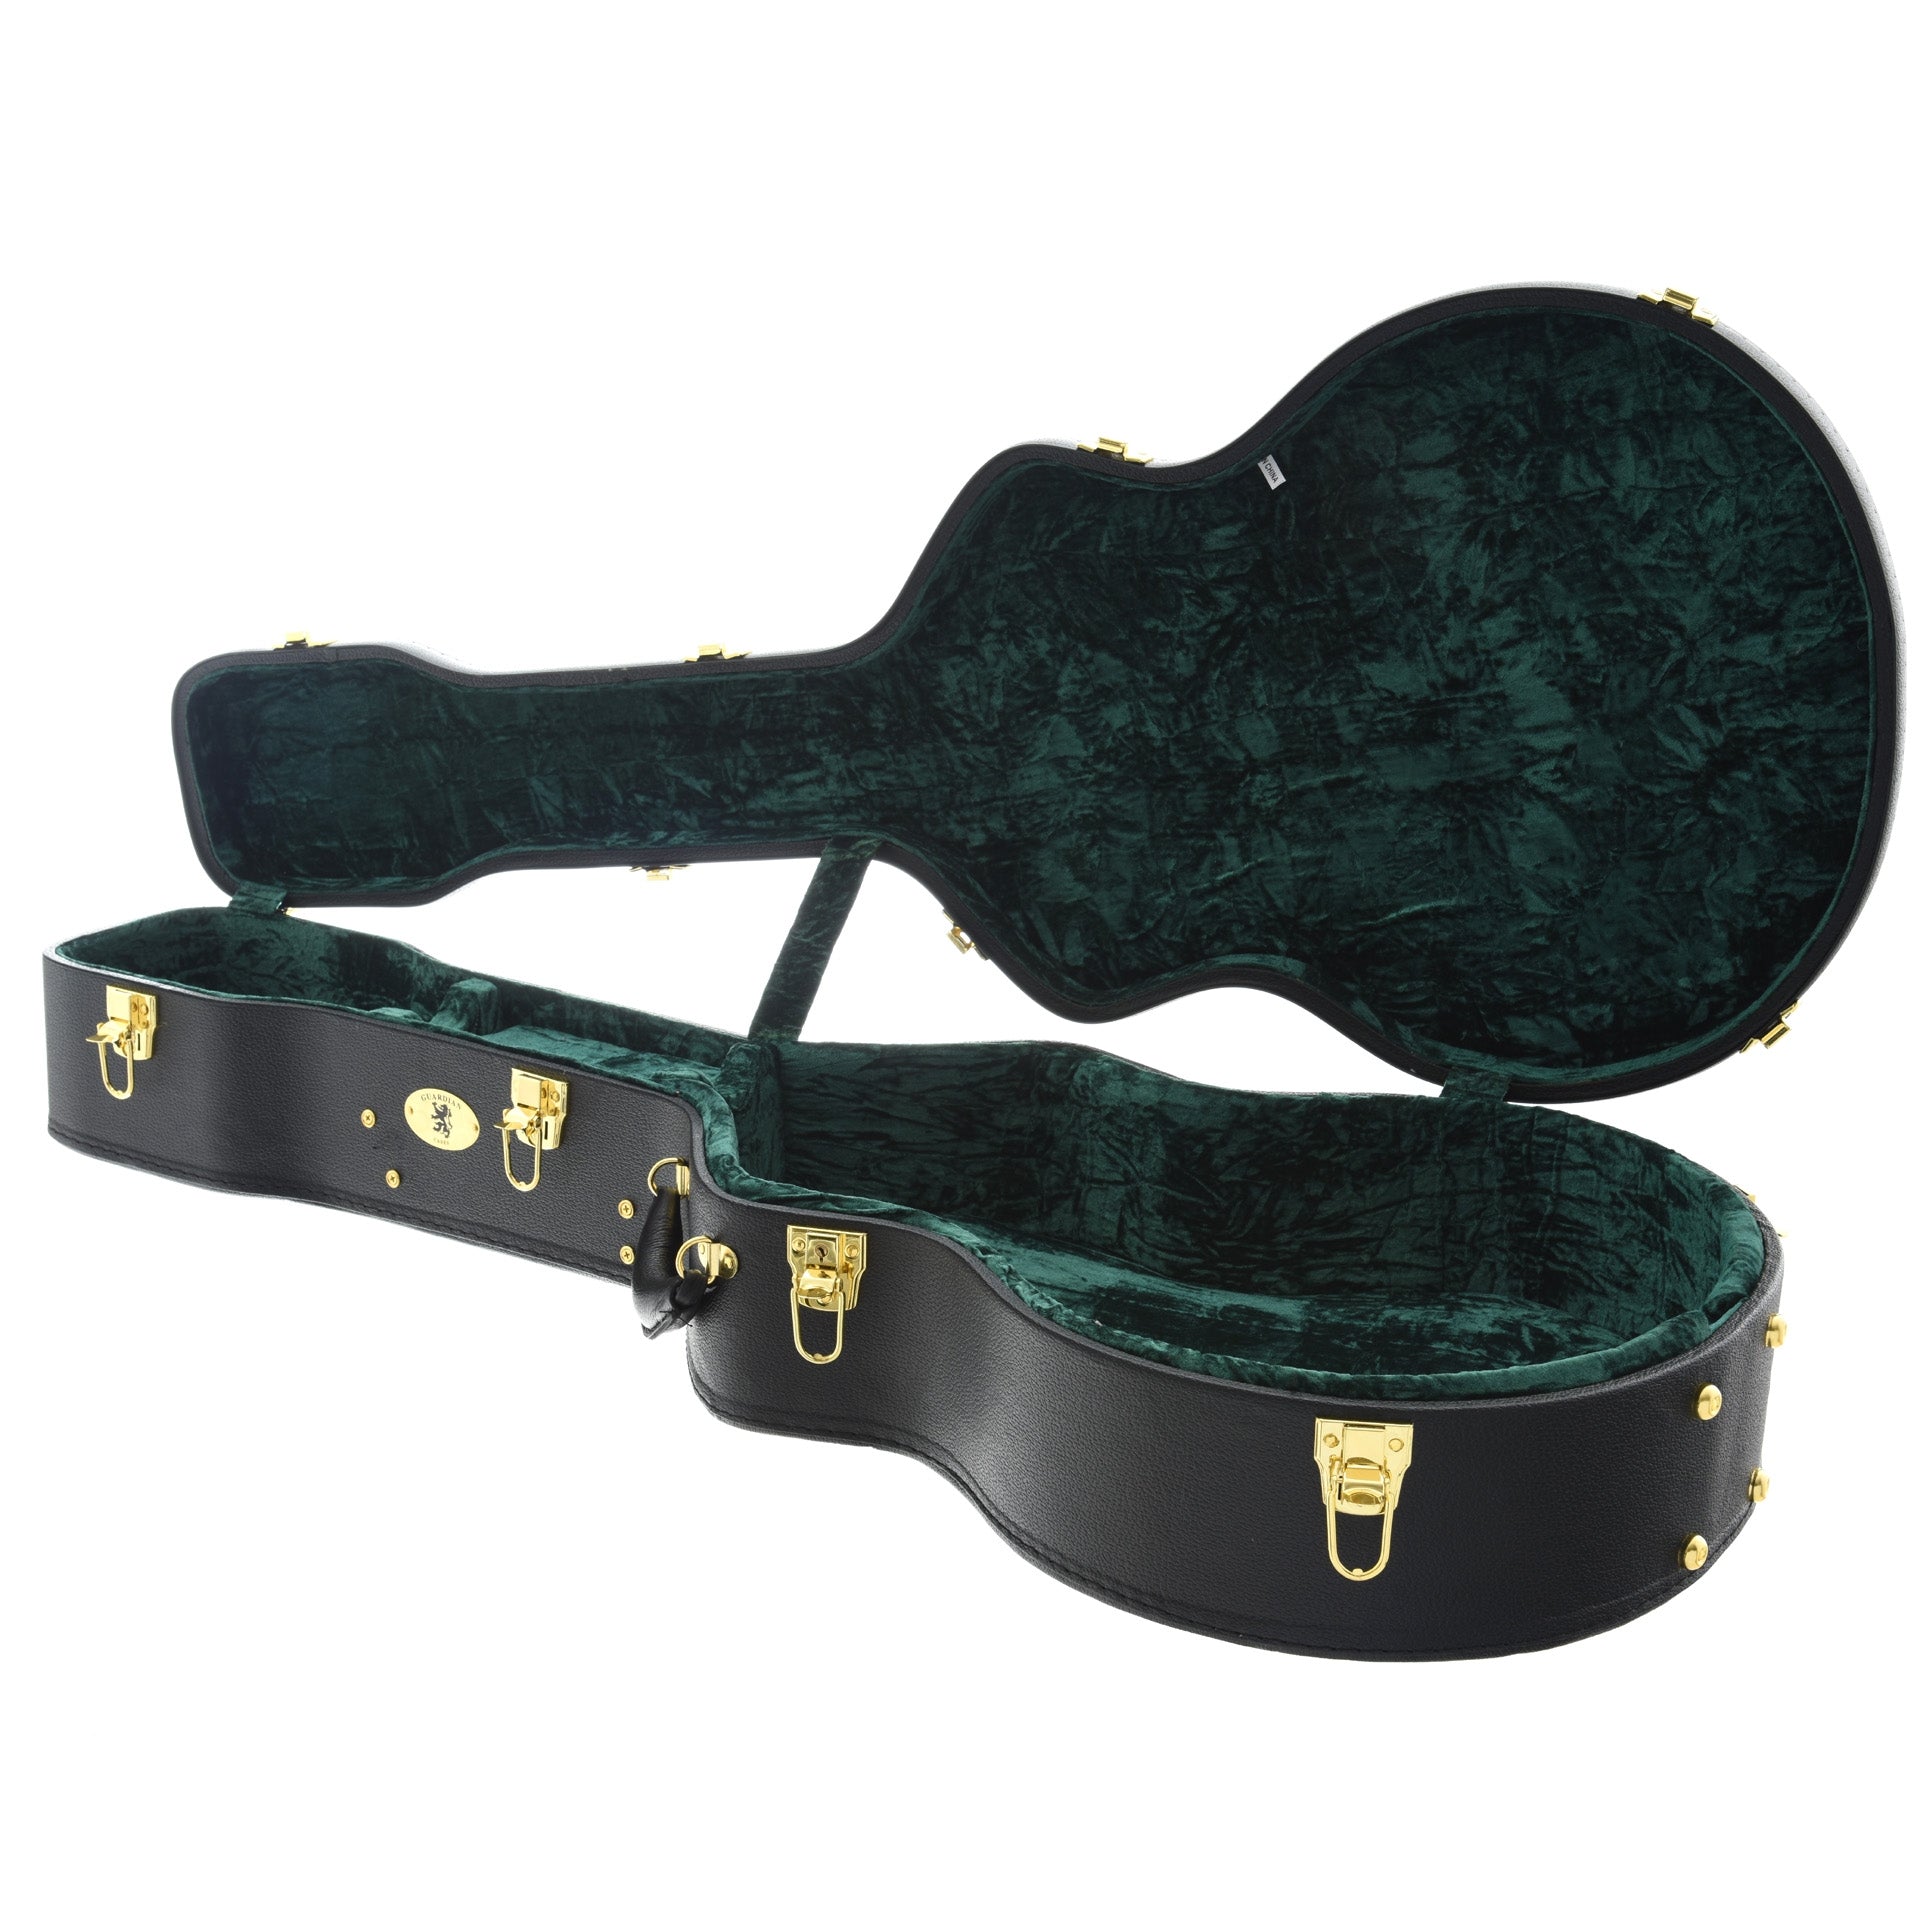 Image 2 of Guardian Vintage "Small-F" Guitar Case - SKU# GVGC-SF : Product Type Accessories & Parts : Elderly Instruments